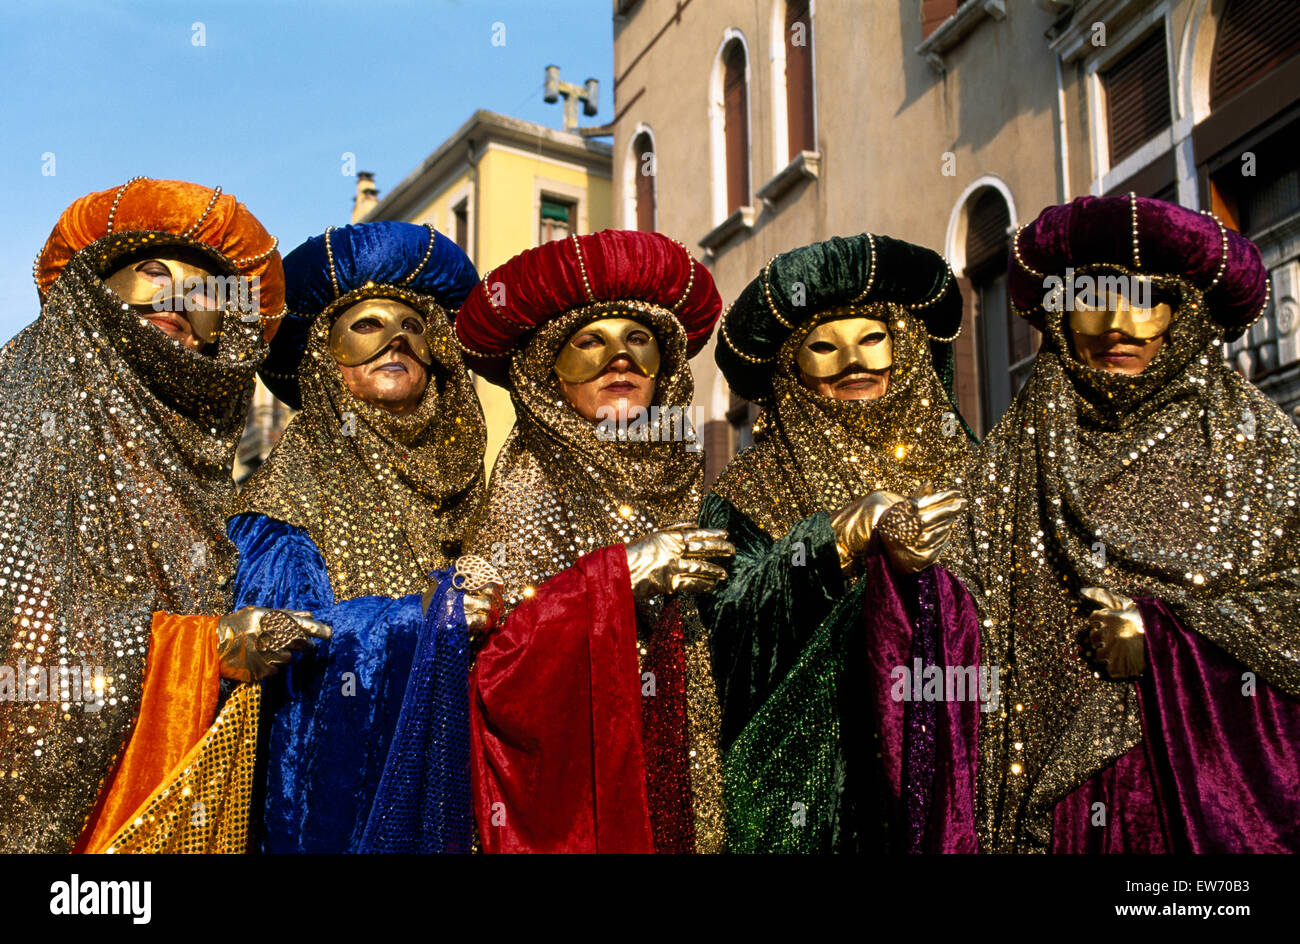 Revellers wearing traditional masks and robes at the Carnival in Venice         FOR EDITORIAL USE ONLY Stock Photo